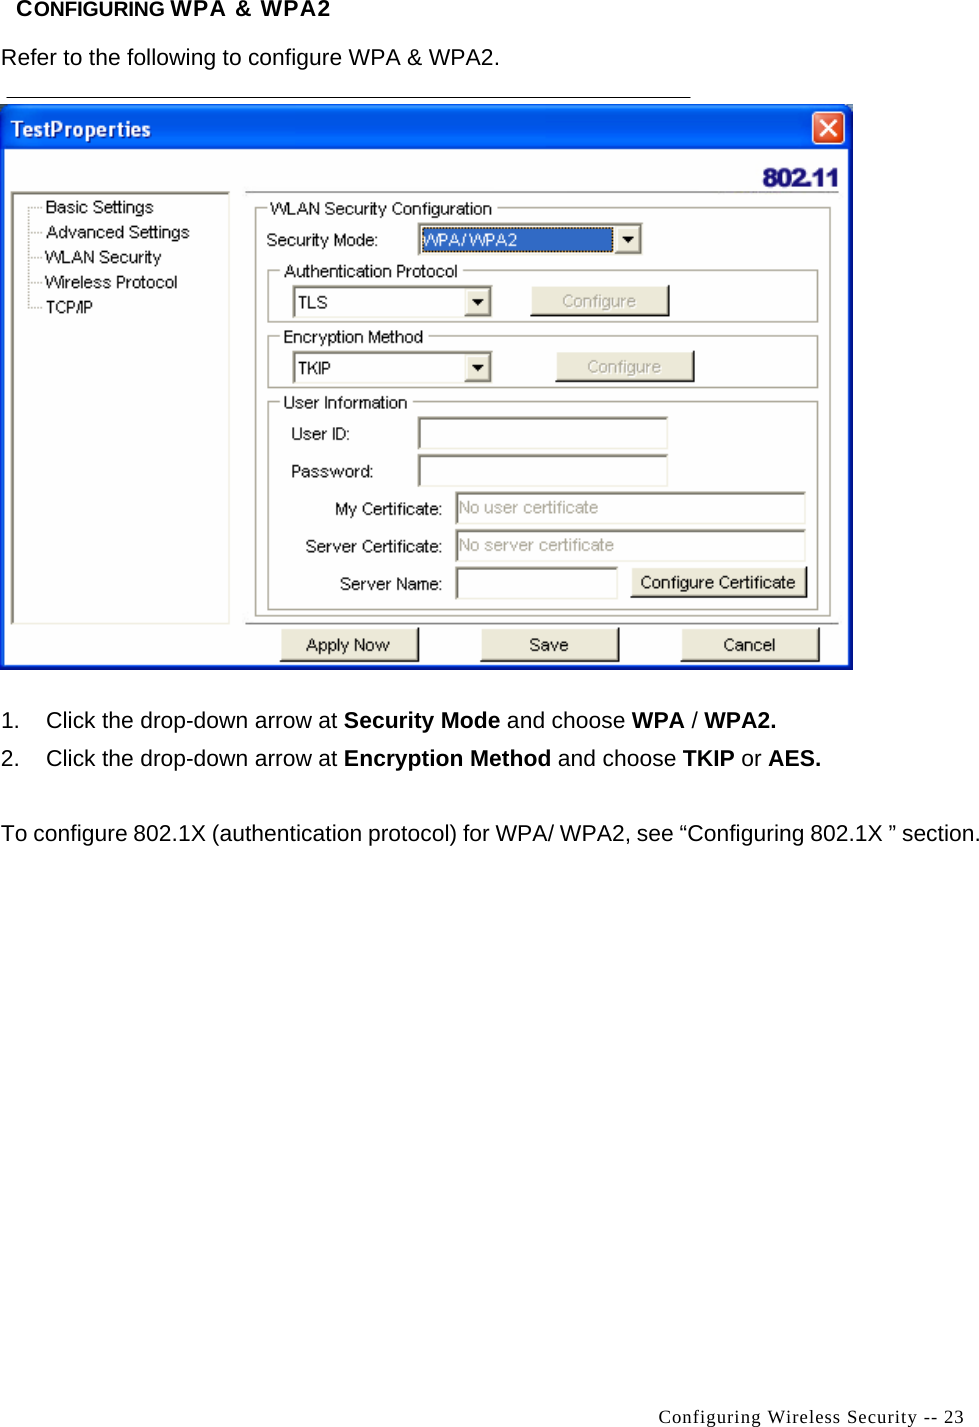   Configuring Wireless Security -- 23CONFIGURING WPA &amp; WPA2 Refer to the following to configure WPA &amp; WPA2.  1.  Click the drop-down arrow at Security Mode and choose WPA / WPA2. 2.  Click the drop-down arrow at Encryption Method and choose TKIP or AES.   To configure 802.1X (authentication protocol) for WPA/ WPA2, see “Configuring 802.1X ” section.  